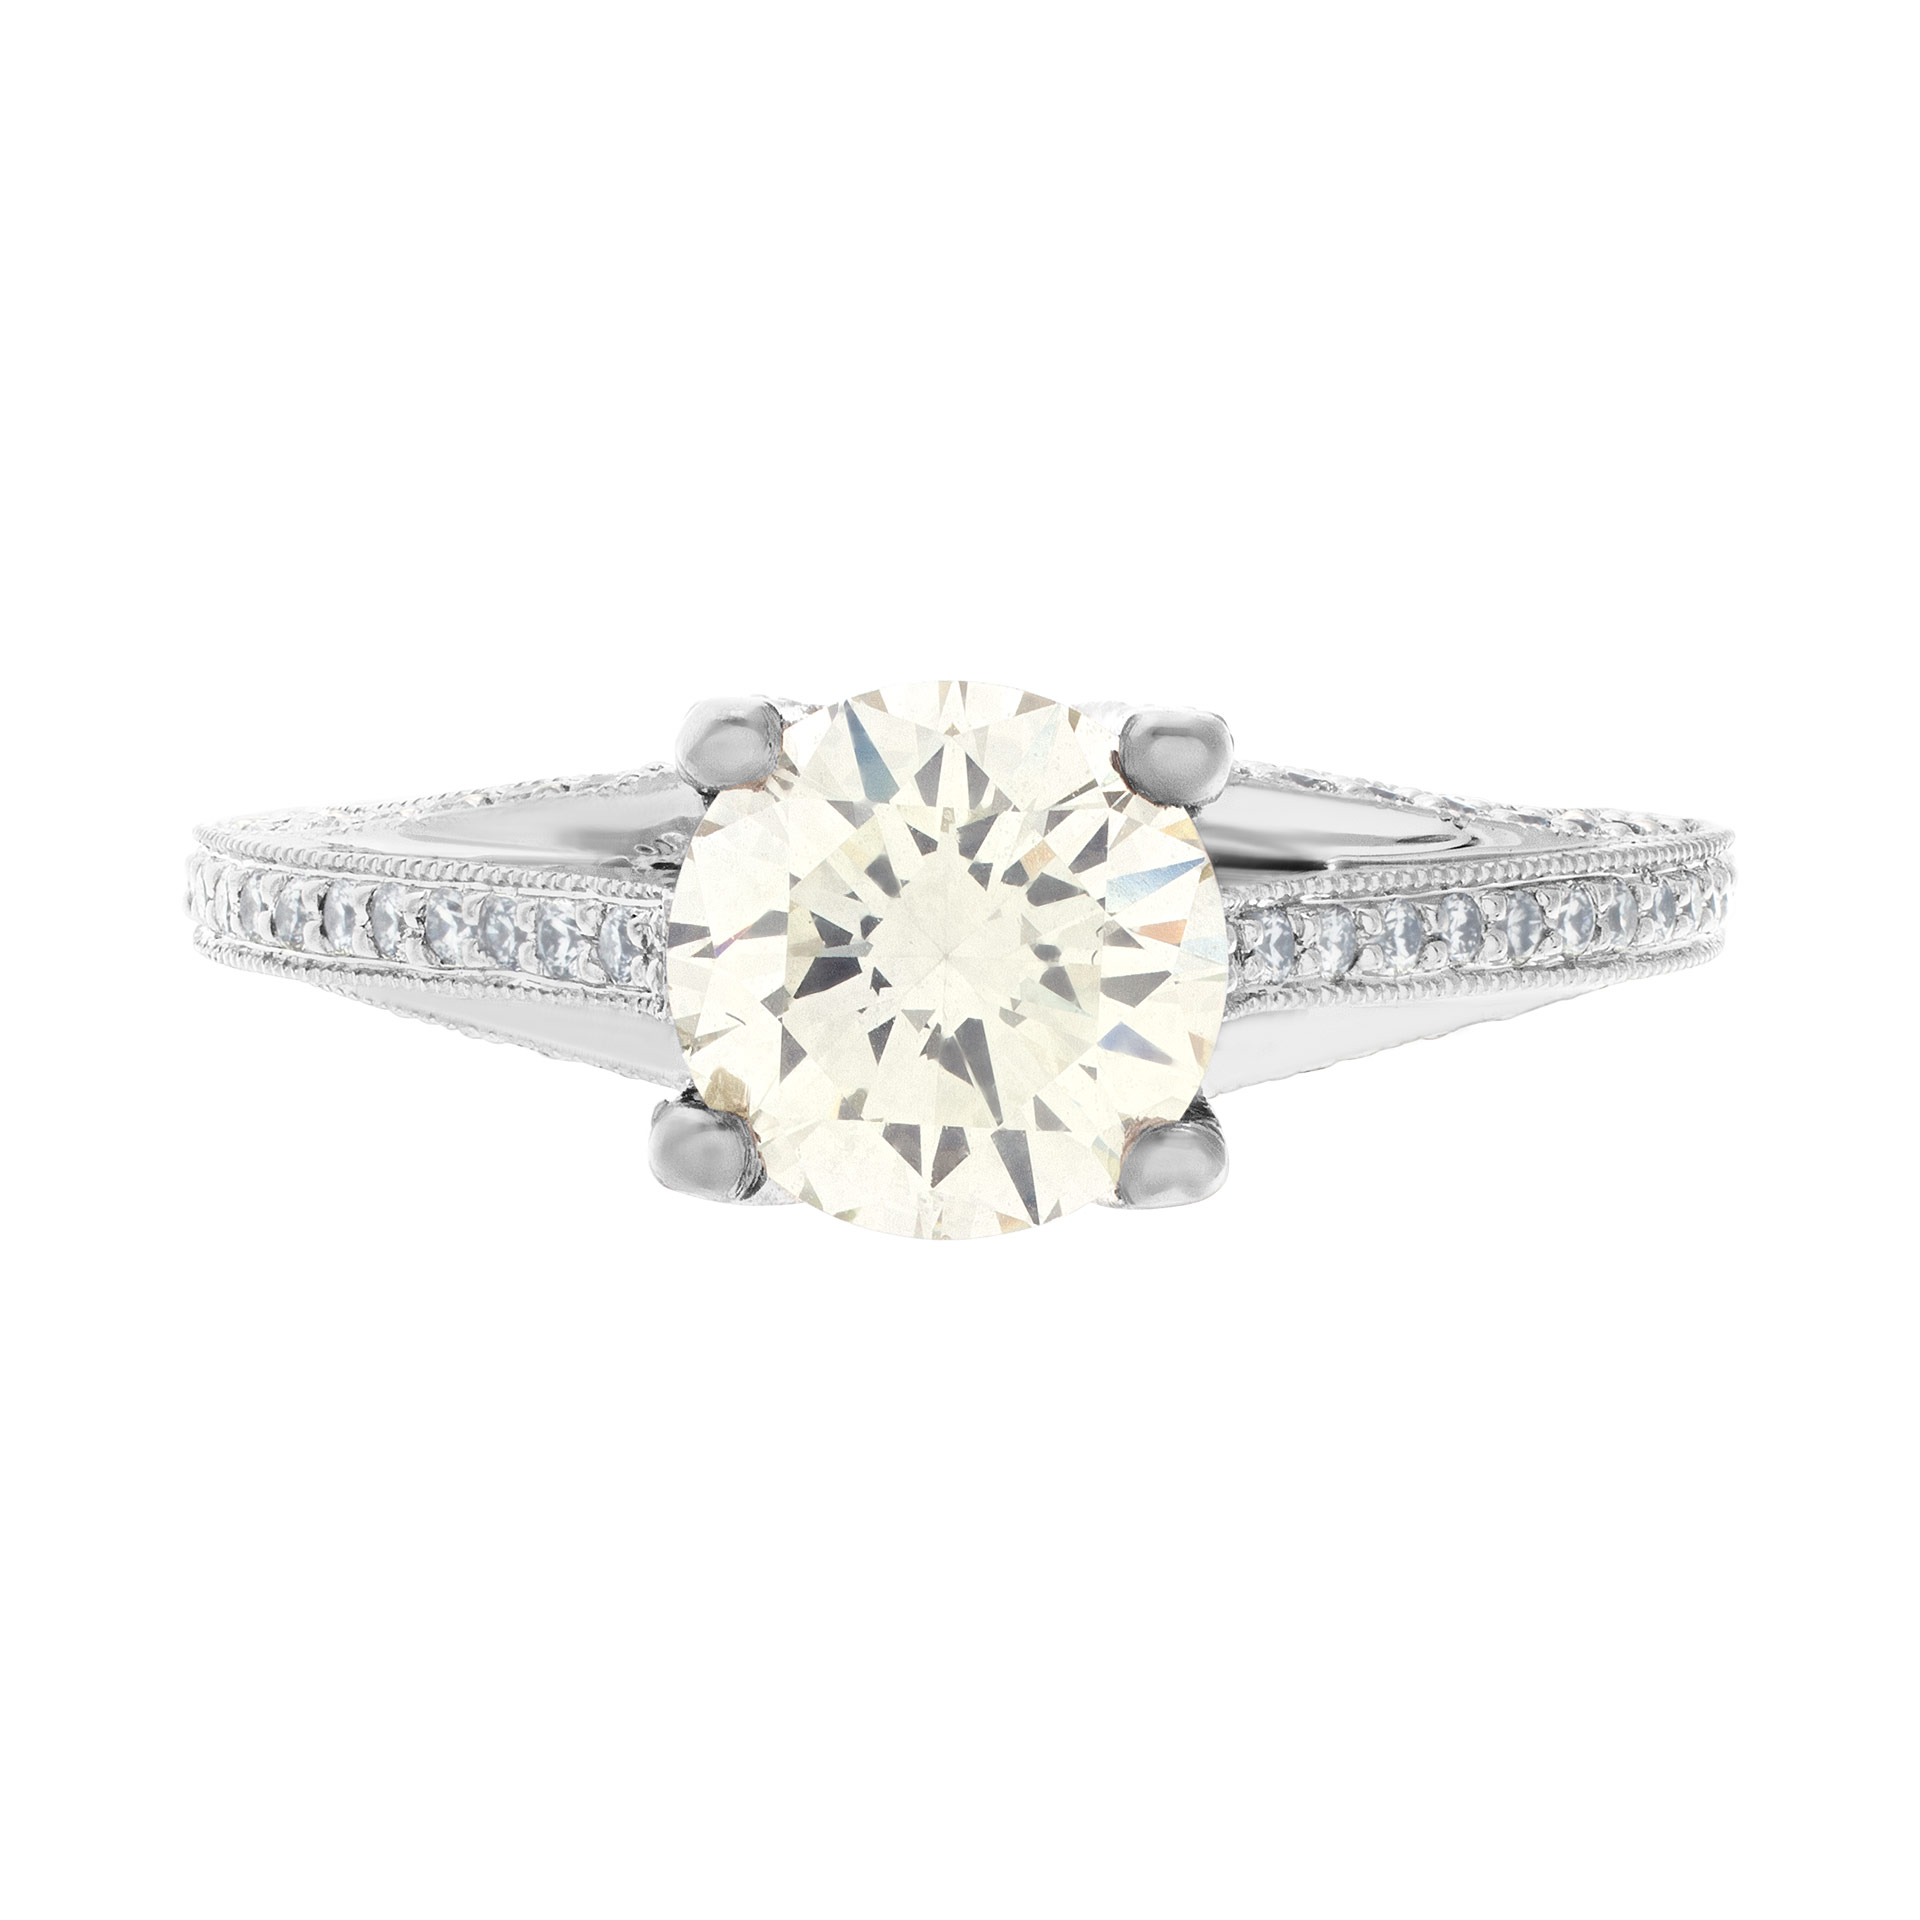 Gia Certified Diamond Ring 1.28 Cts (M Color, Si2 Clarity) In 18k White Gold Ritani Setting.